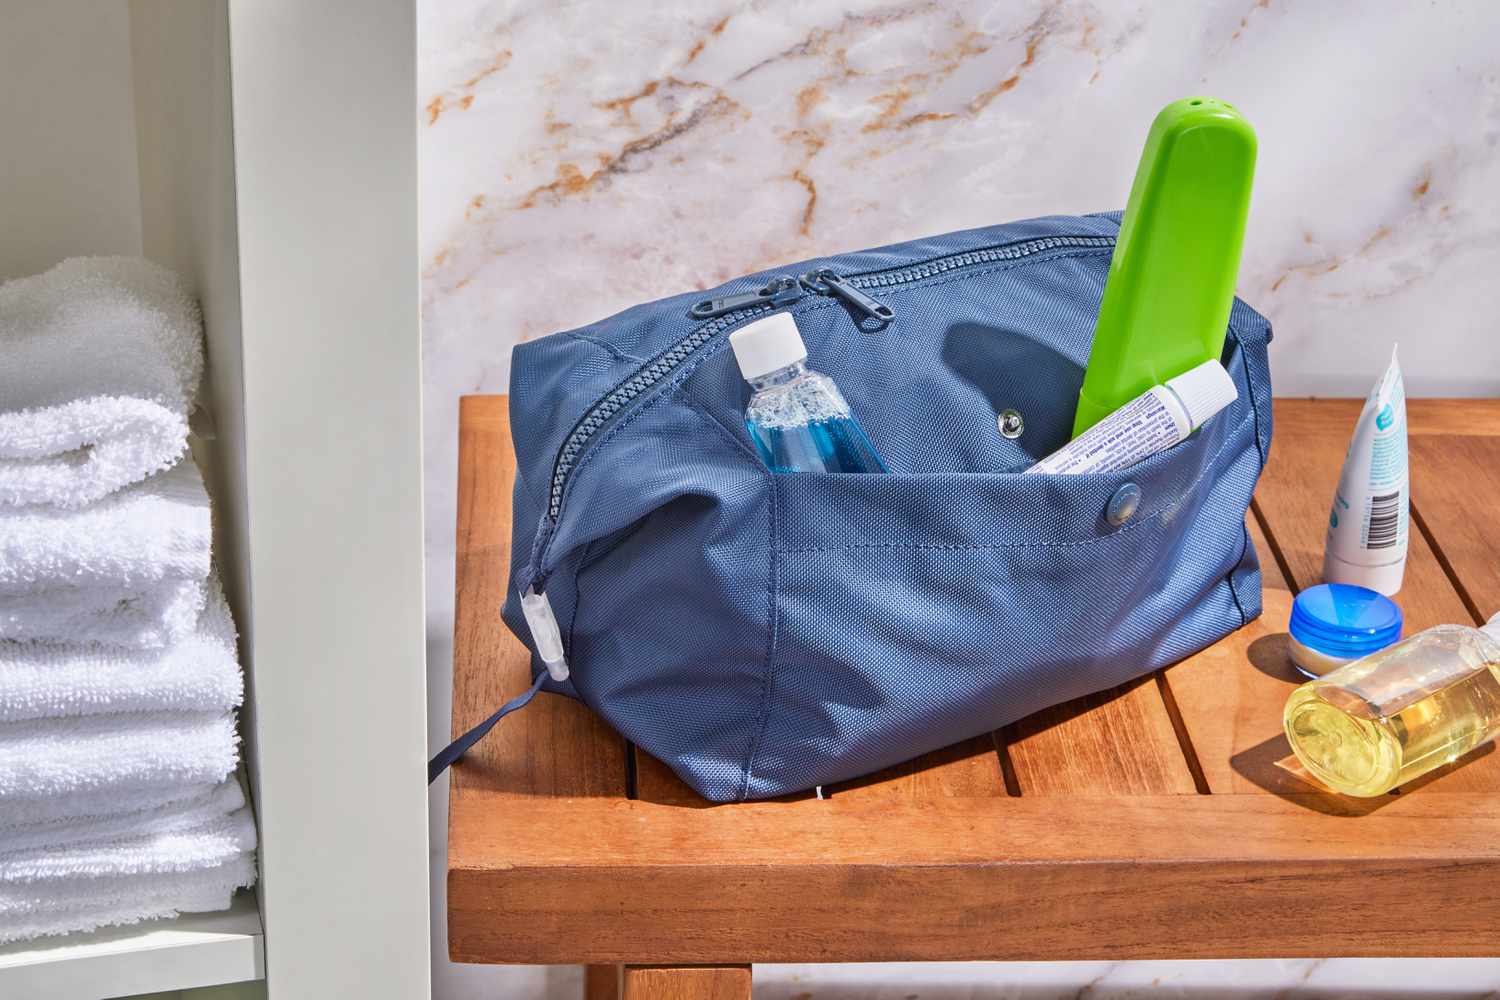 Dare to Roam Steward Dopp Kit on top of a wooden table with items sticking out from the side pocket